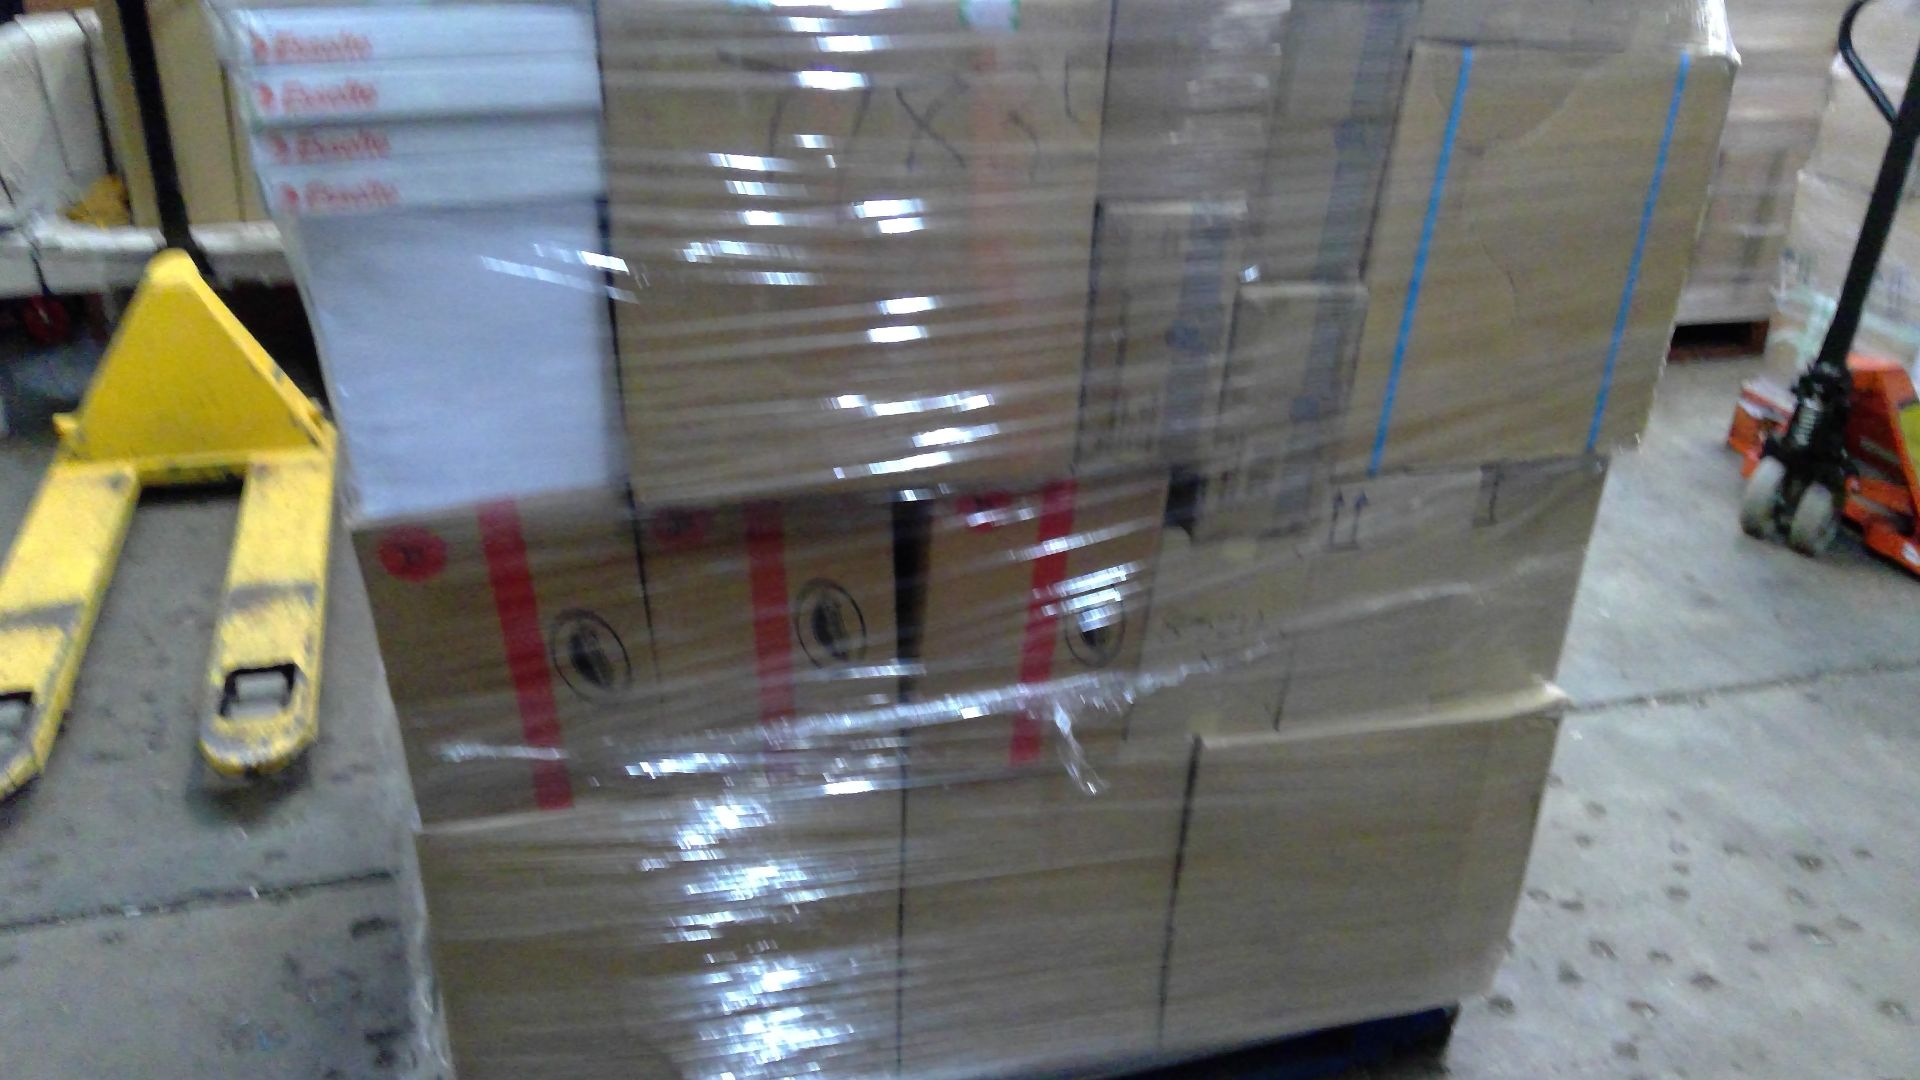 + VAT Grade U Pallet Of Stationery Including Folders-Rubber Bands-Box Files-Leverarch Files- - Image 8 of 9